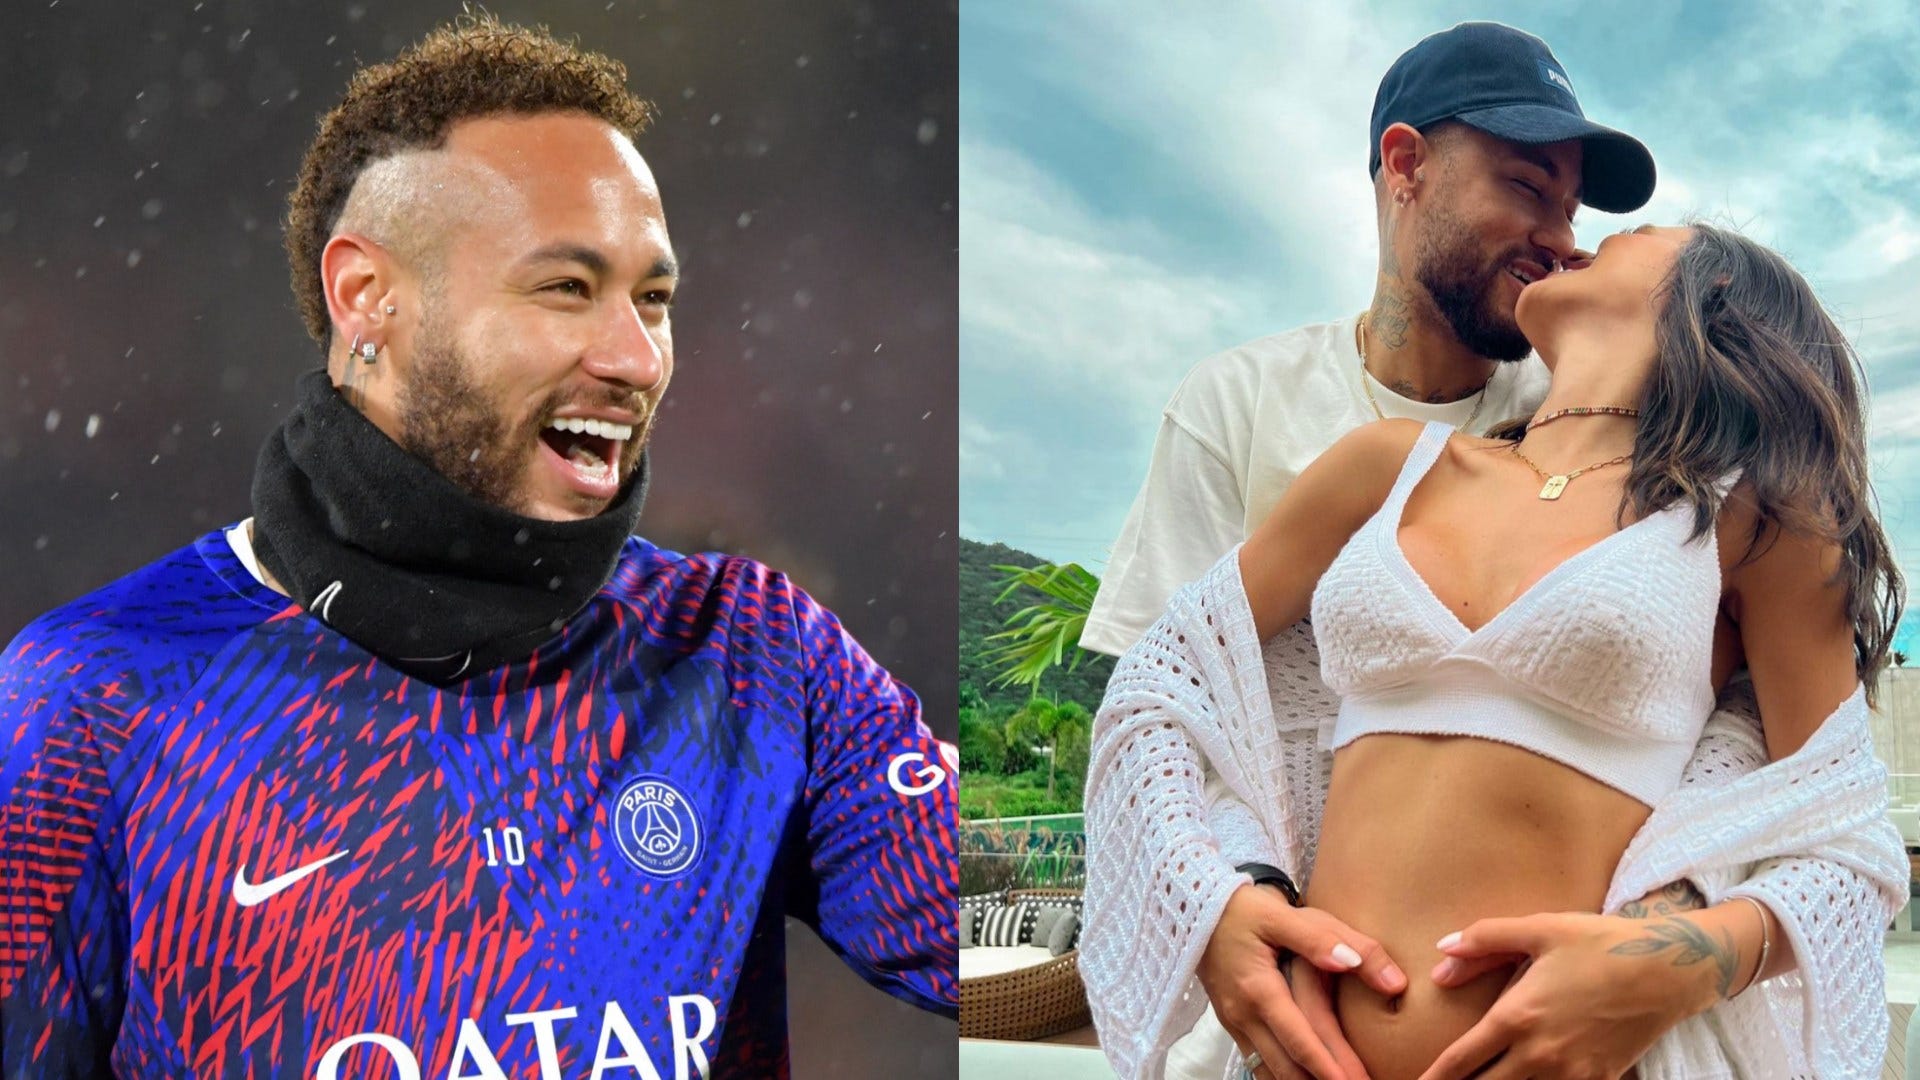 Neymar and PSG stars girlfriend Bruna Biancardi announce they are expecting first child together Goal UK photo